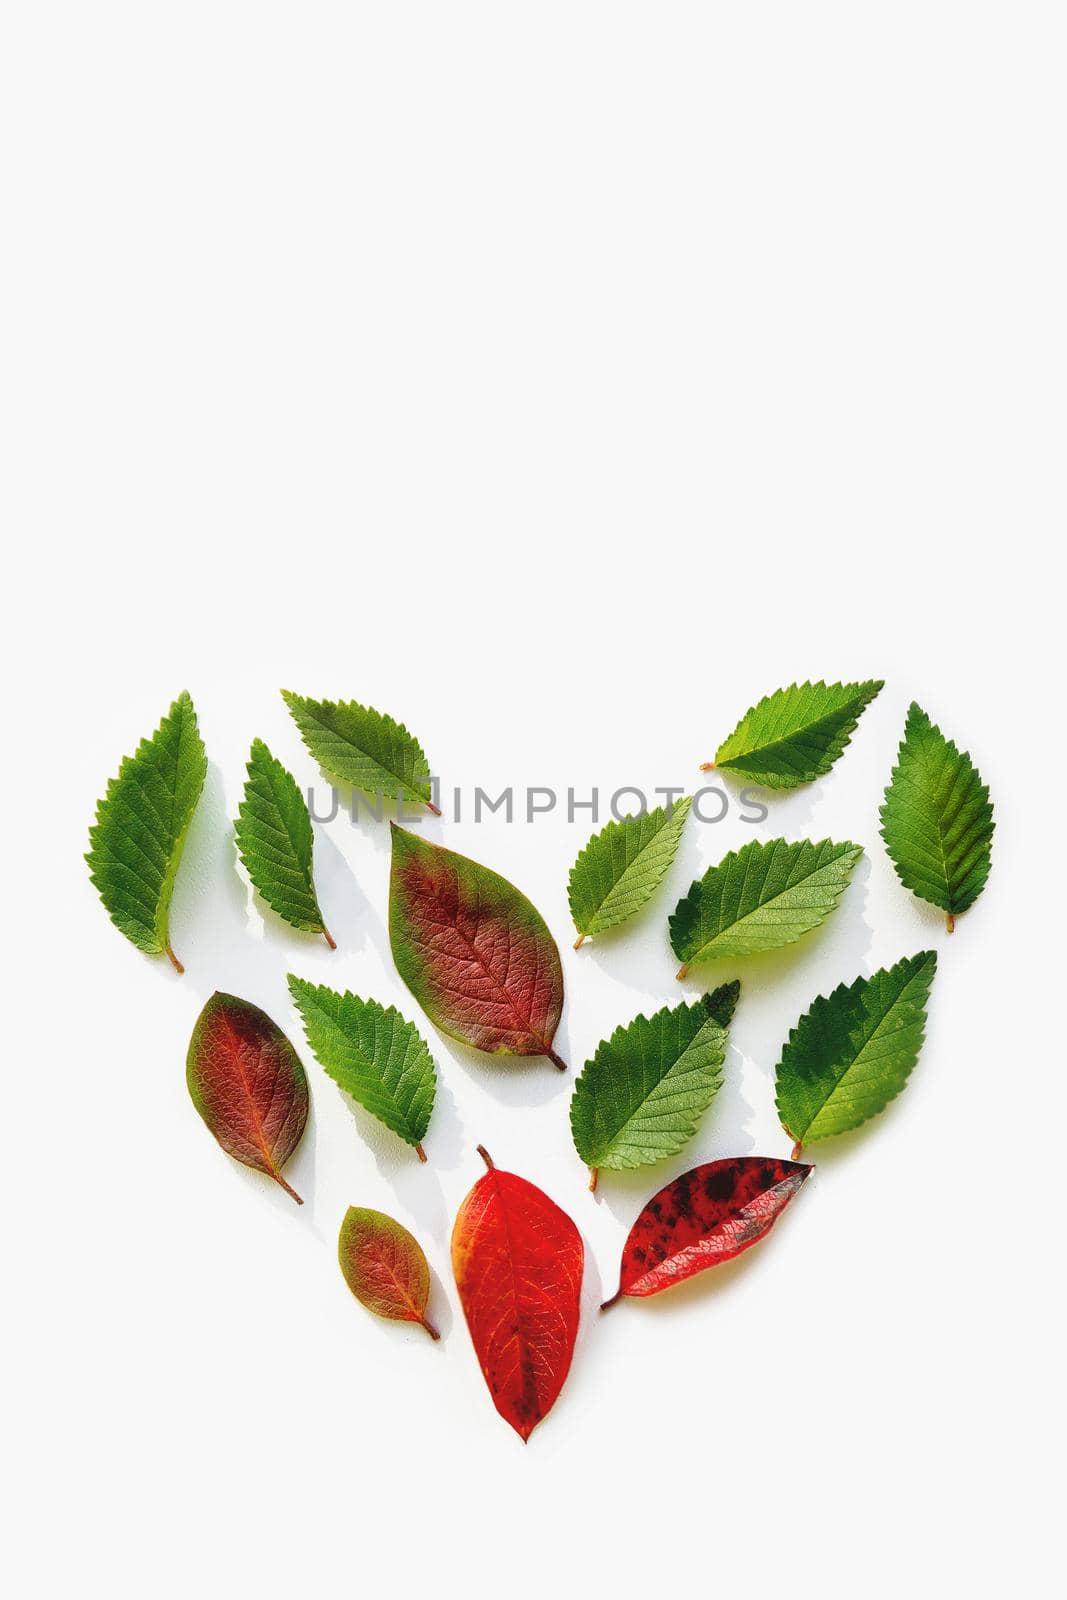 Top view on heart shape made of red andgreen leaves on white background. Love of nature. Flat lay concept with copy space.